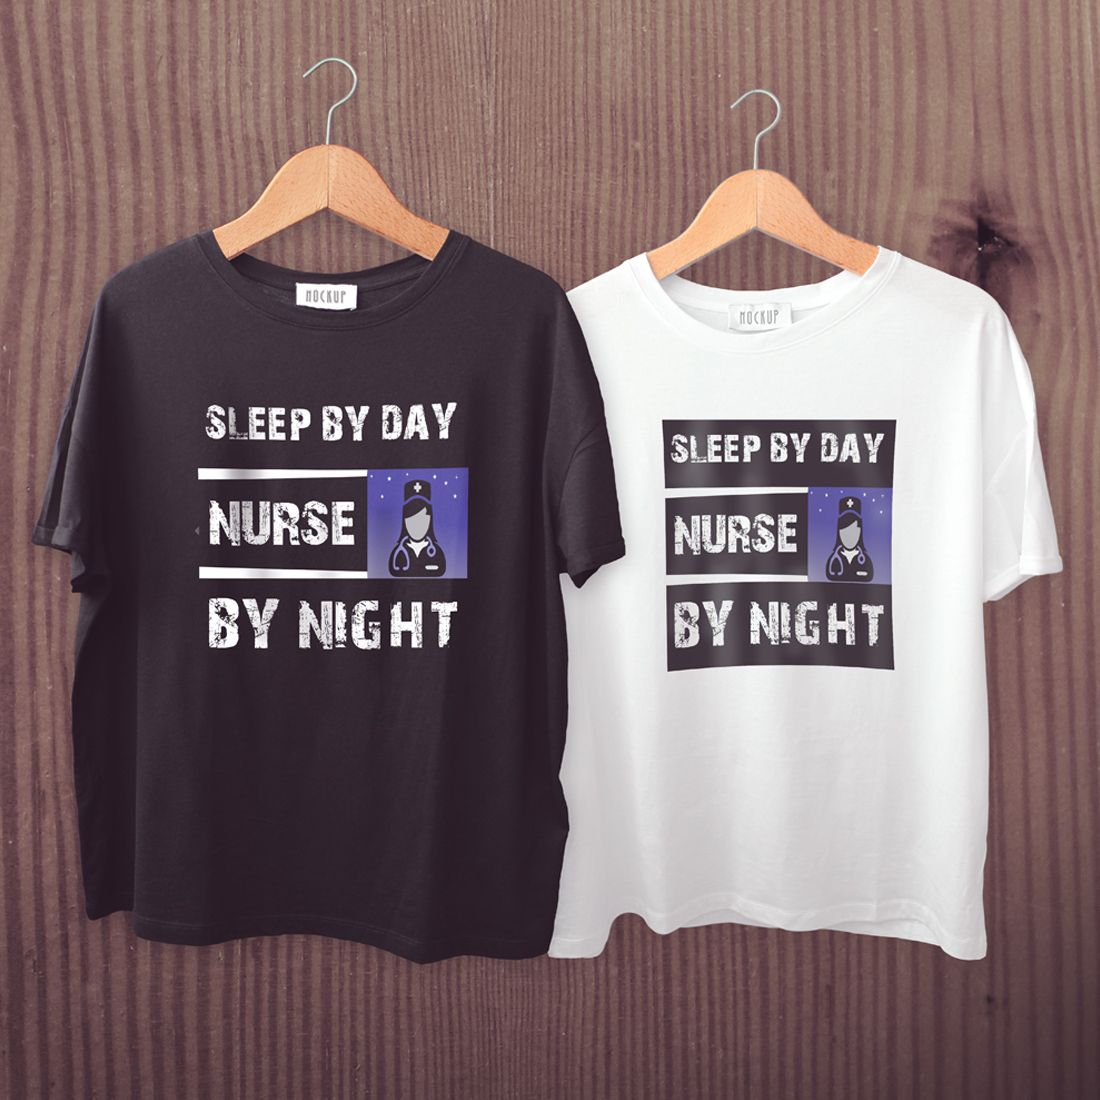 Sleep By Day Nurse By Night preview image.